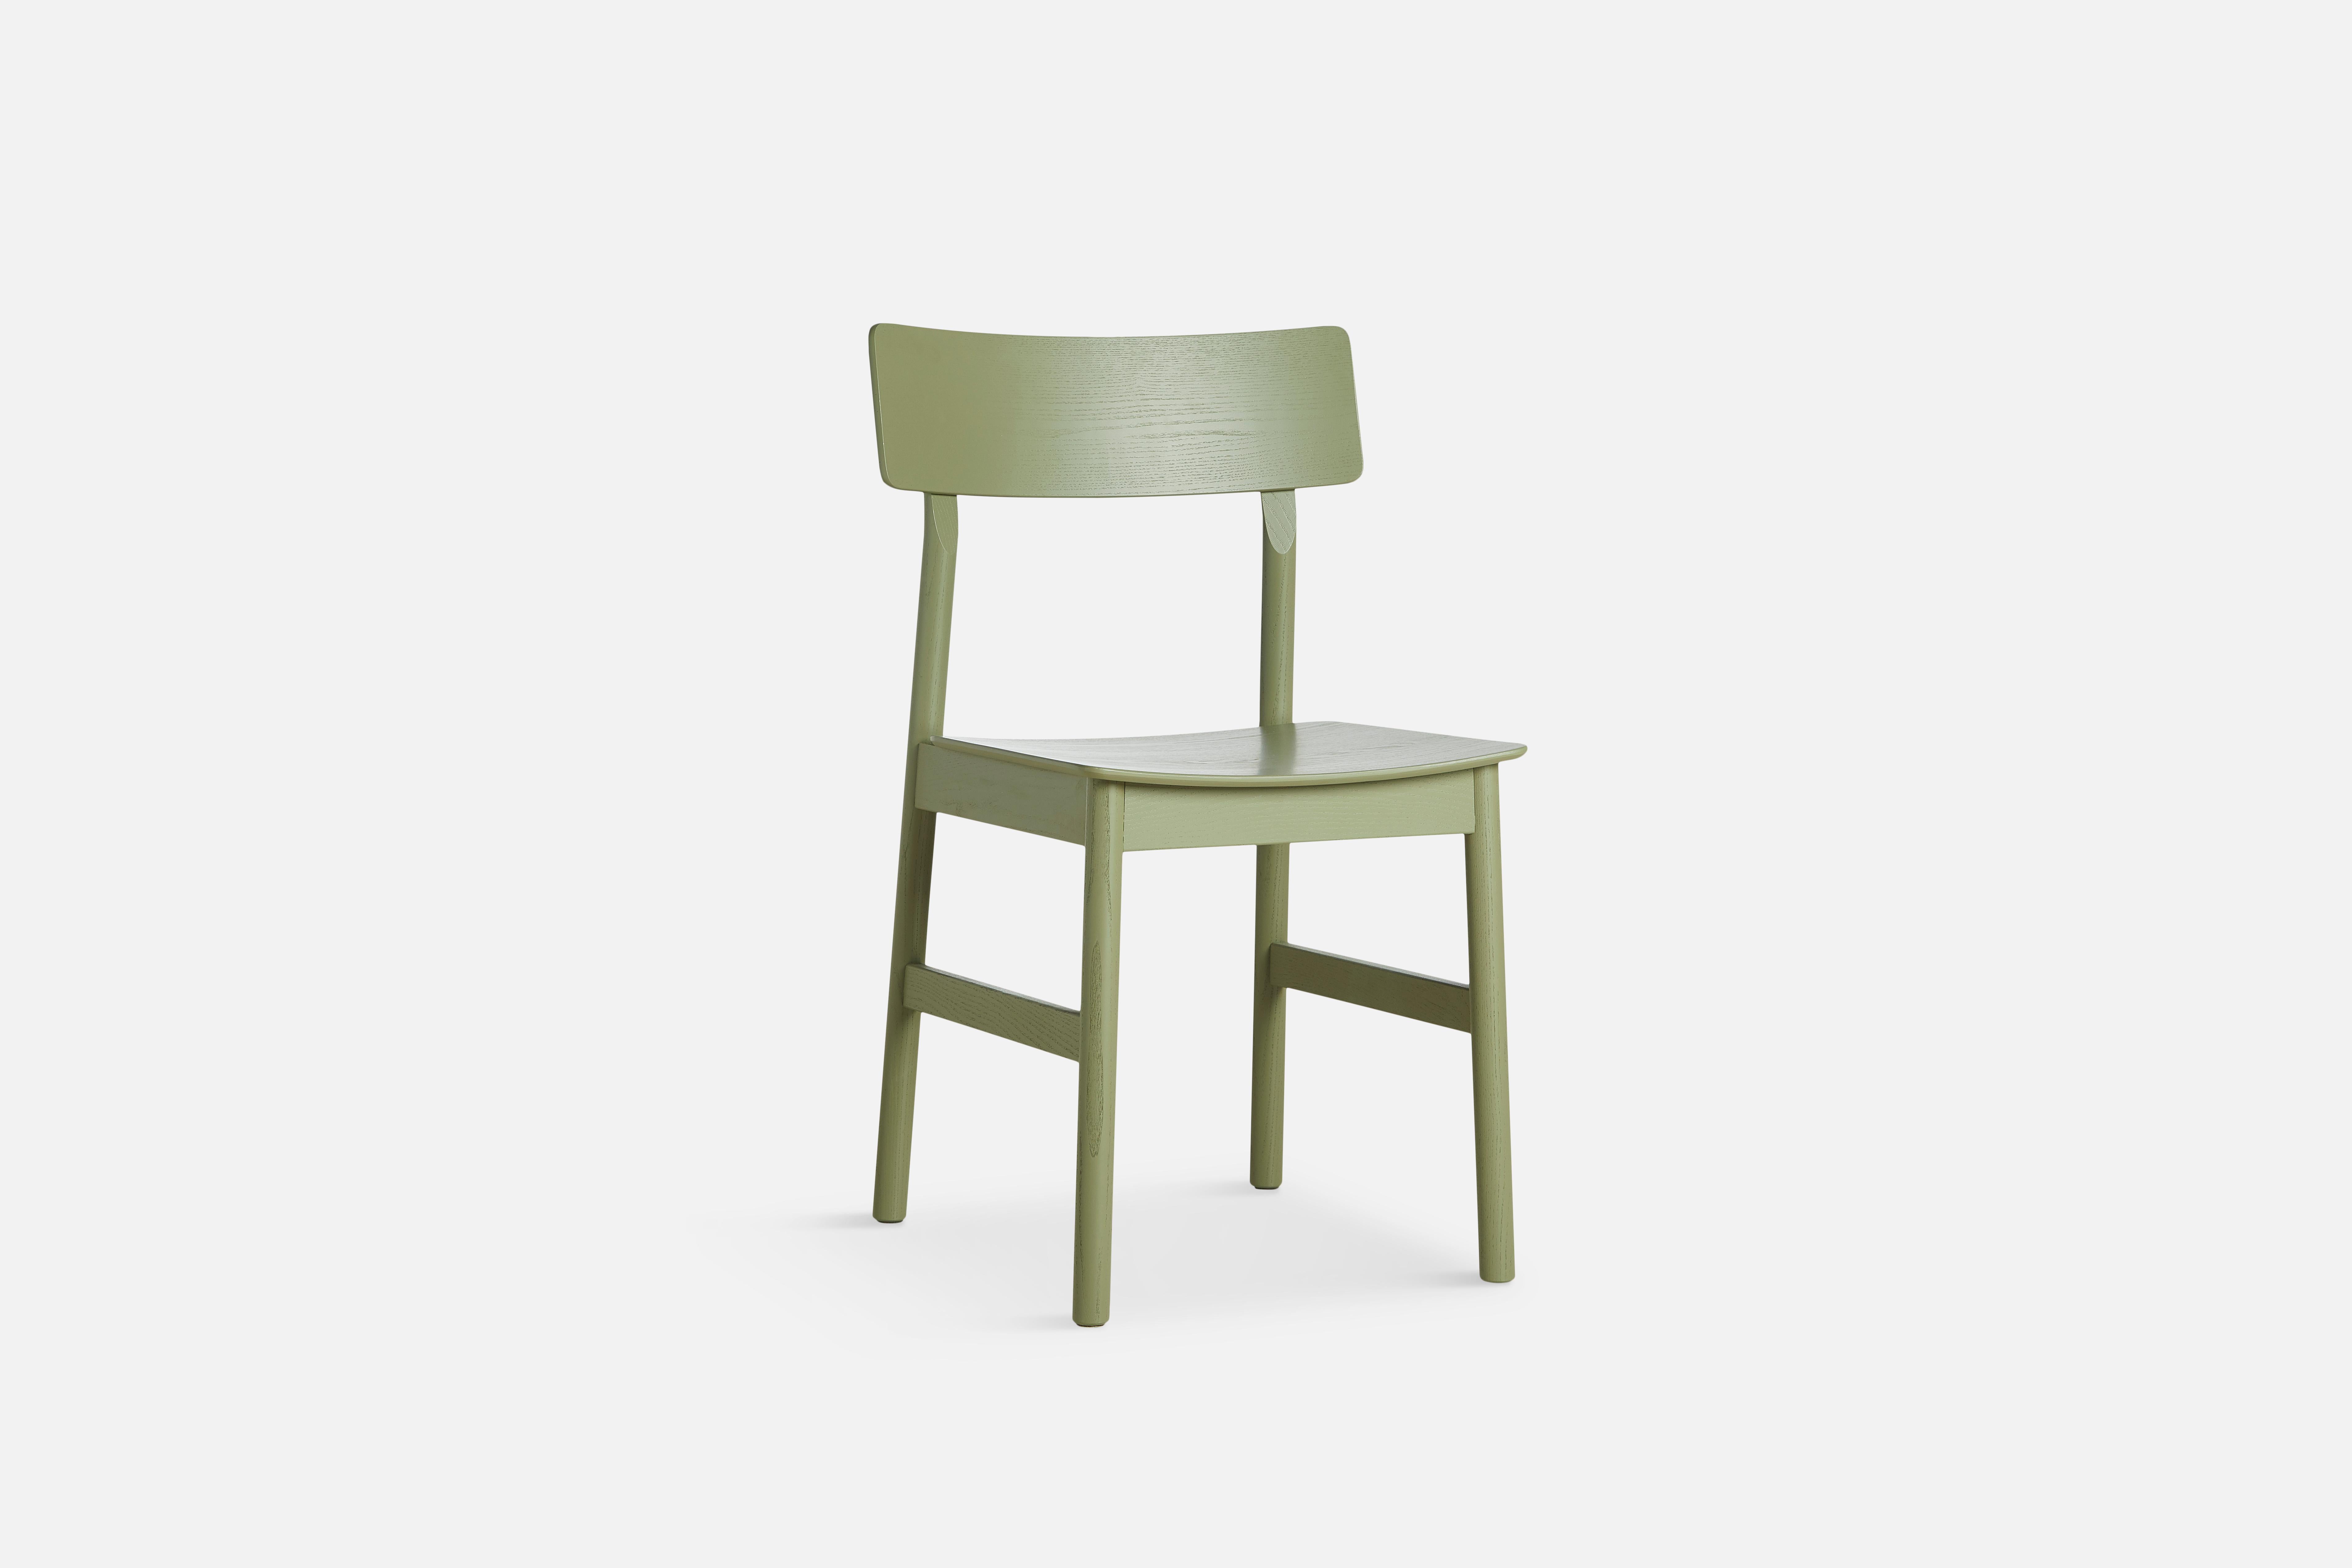 Pause Olive Green Dining Chair 2.0 by Kasper Nyman
Materials: Ash, Plywood
Dimensions: D 47 x W 48 x H 80 cm
Also available in different colours and finishes. Please contact us

The founders, Mia and Torben Koed, decided to put their 30 years